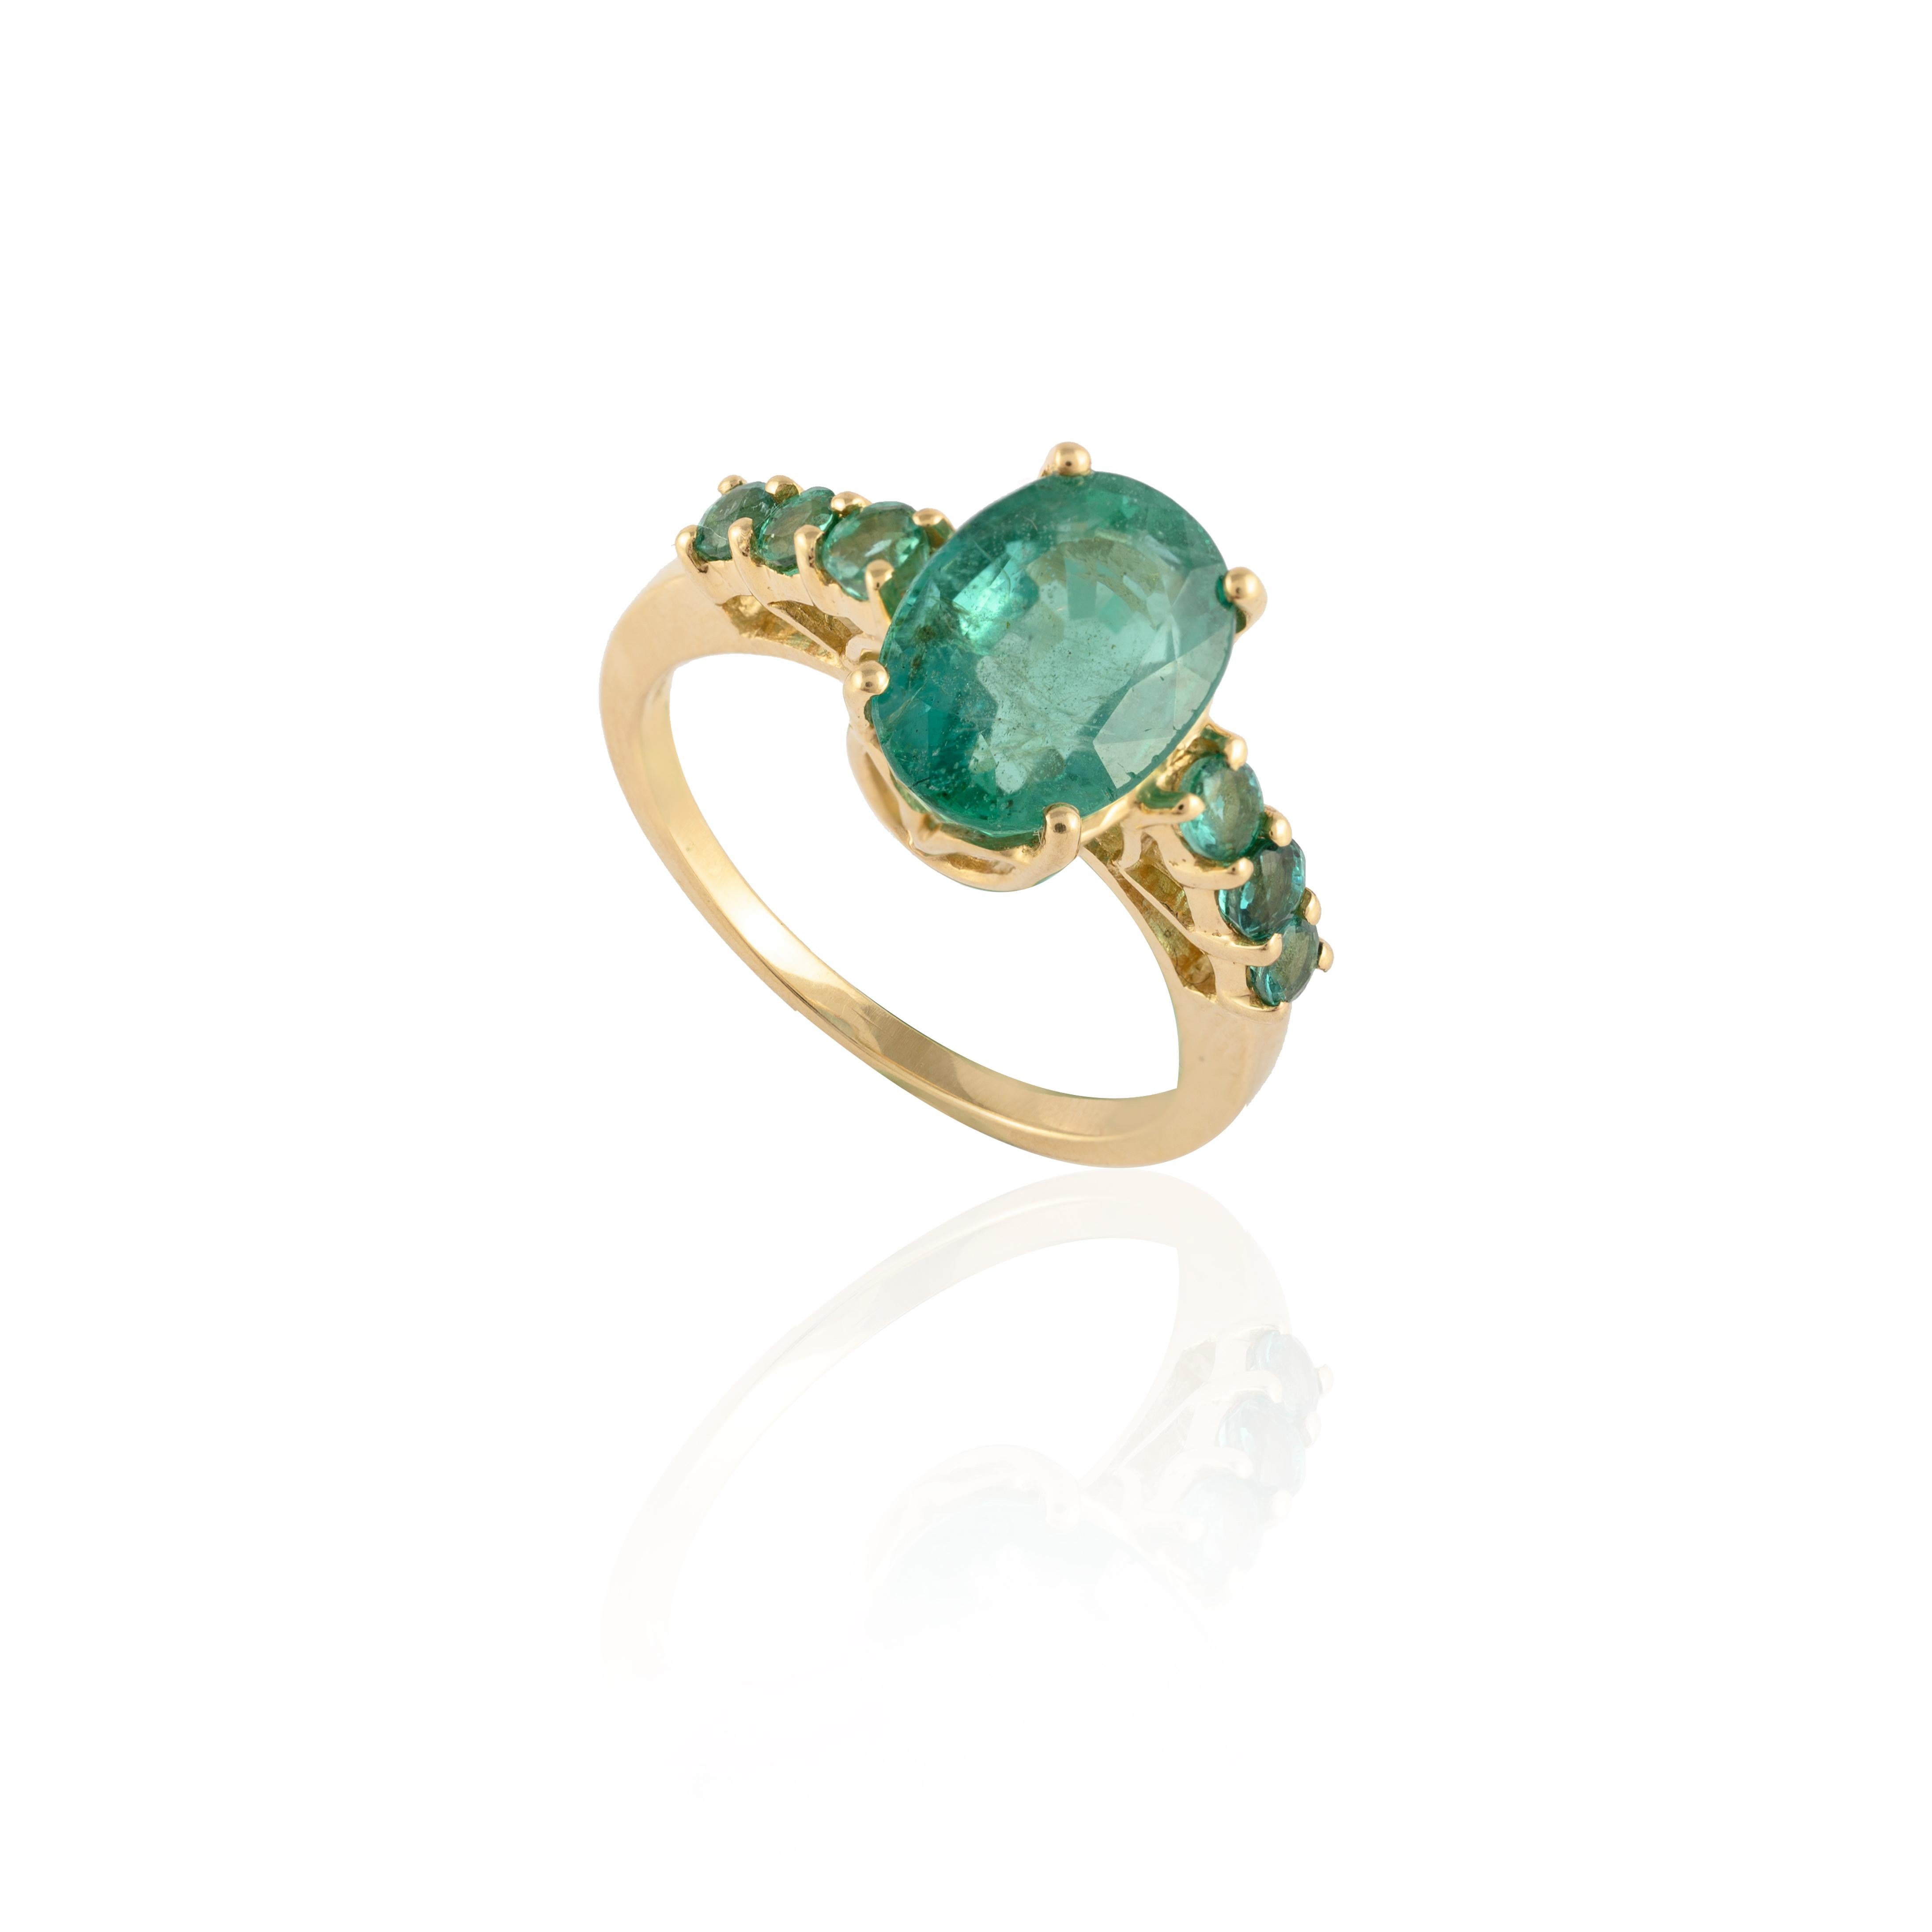 For Sale:  3.09 Carat Genuine Emerald Ring Handcrafted in 14k Solid Yellow Gold 5